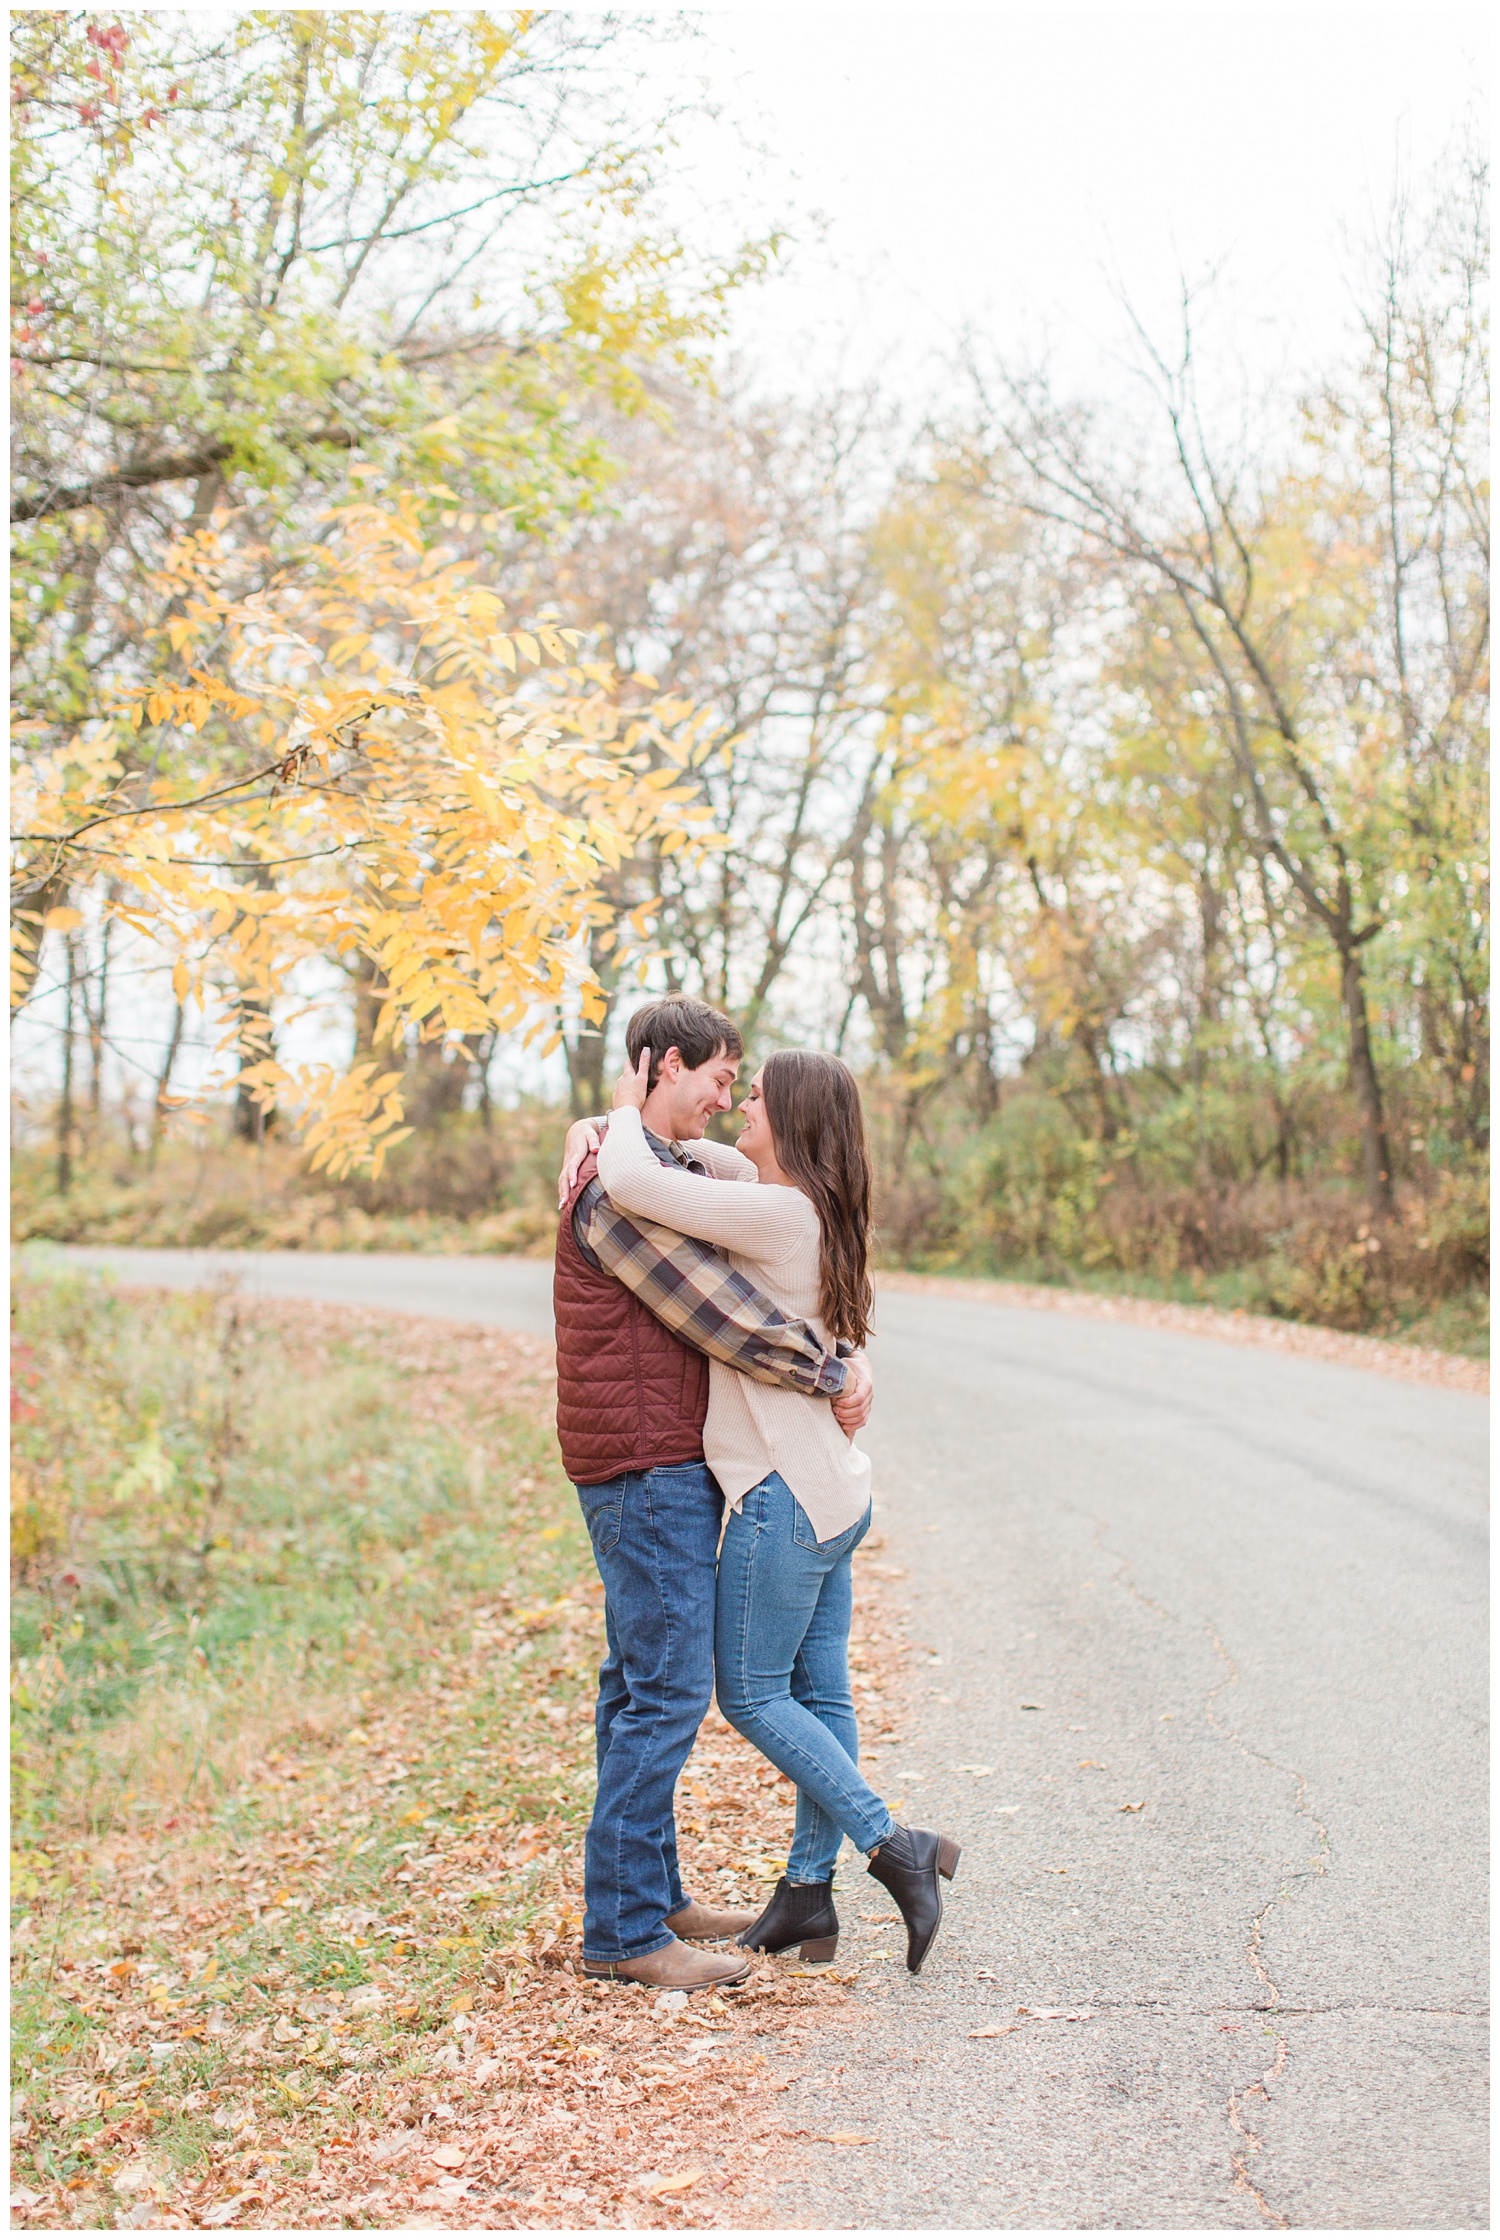 Fall in Iowa, Jenna embraces Brady in the middle of an autumn path at Lost Island Nature Center | CB Studio